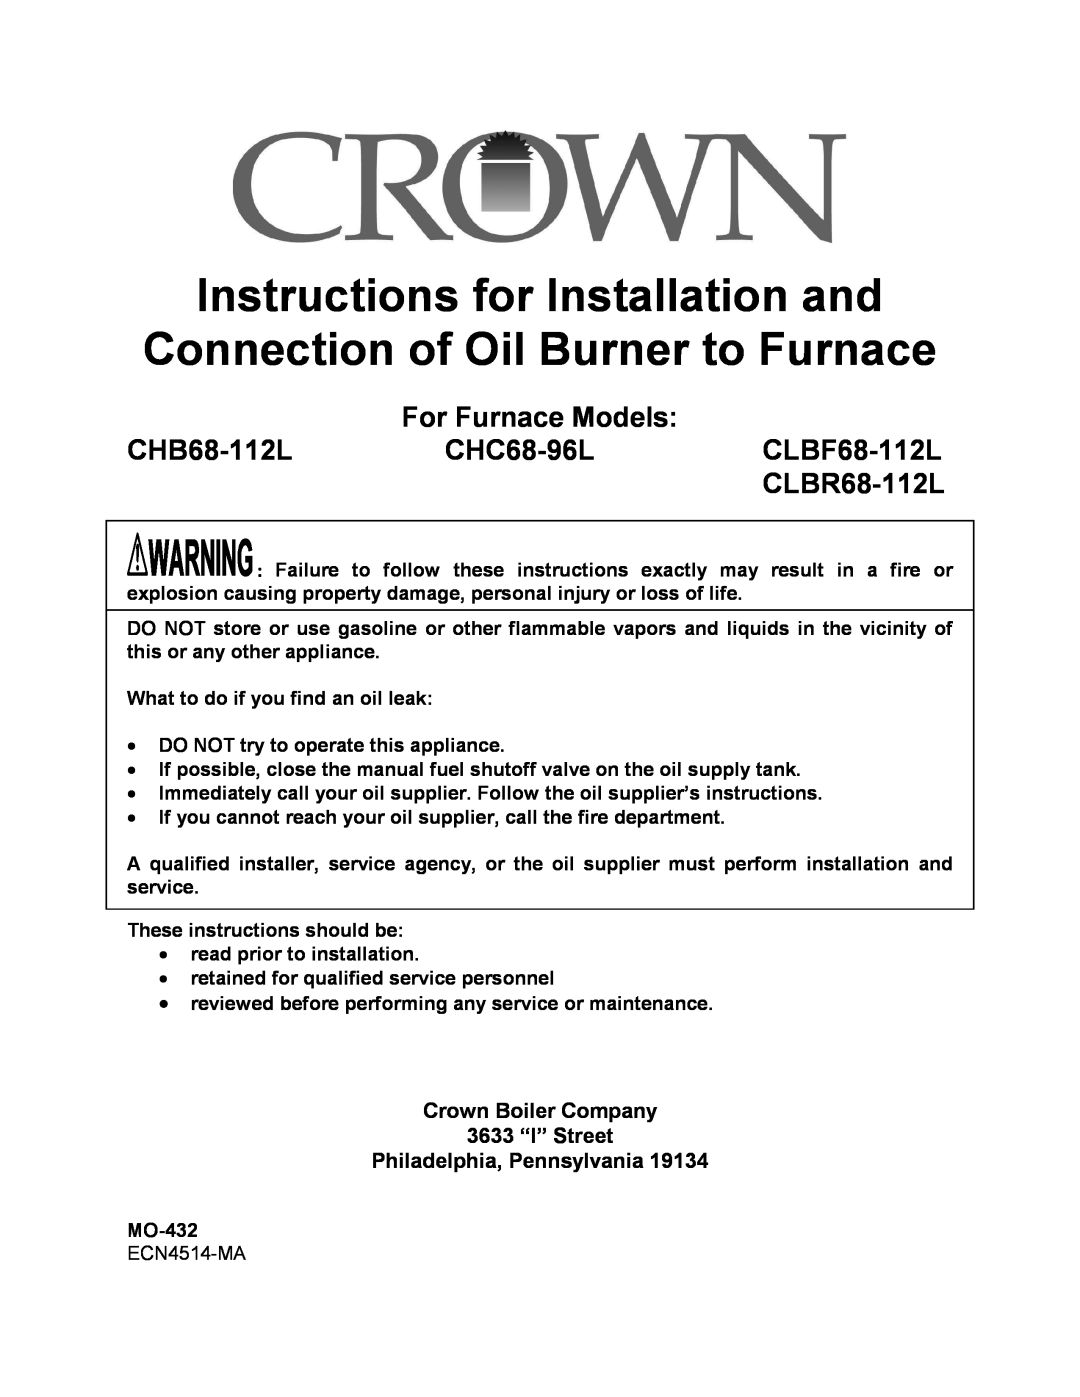 Crown Boiler CHB68-112L, CLBR68-112L manual Instructions for Installation and Connection of Oil Burner to Furnace 